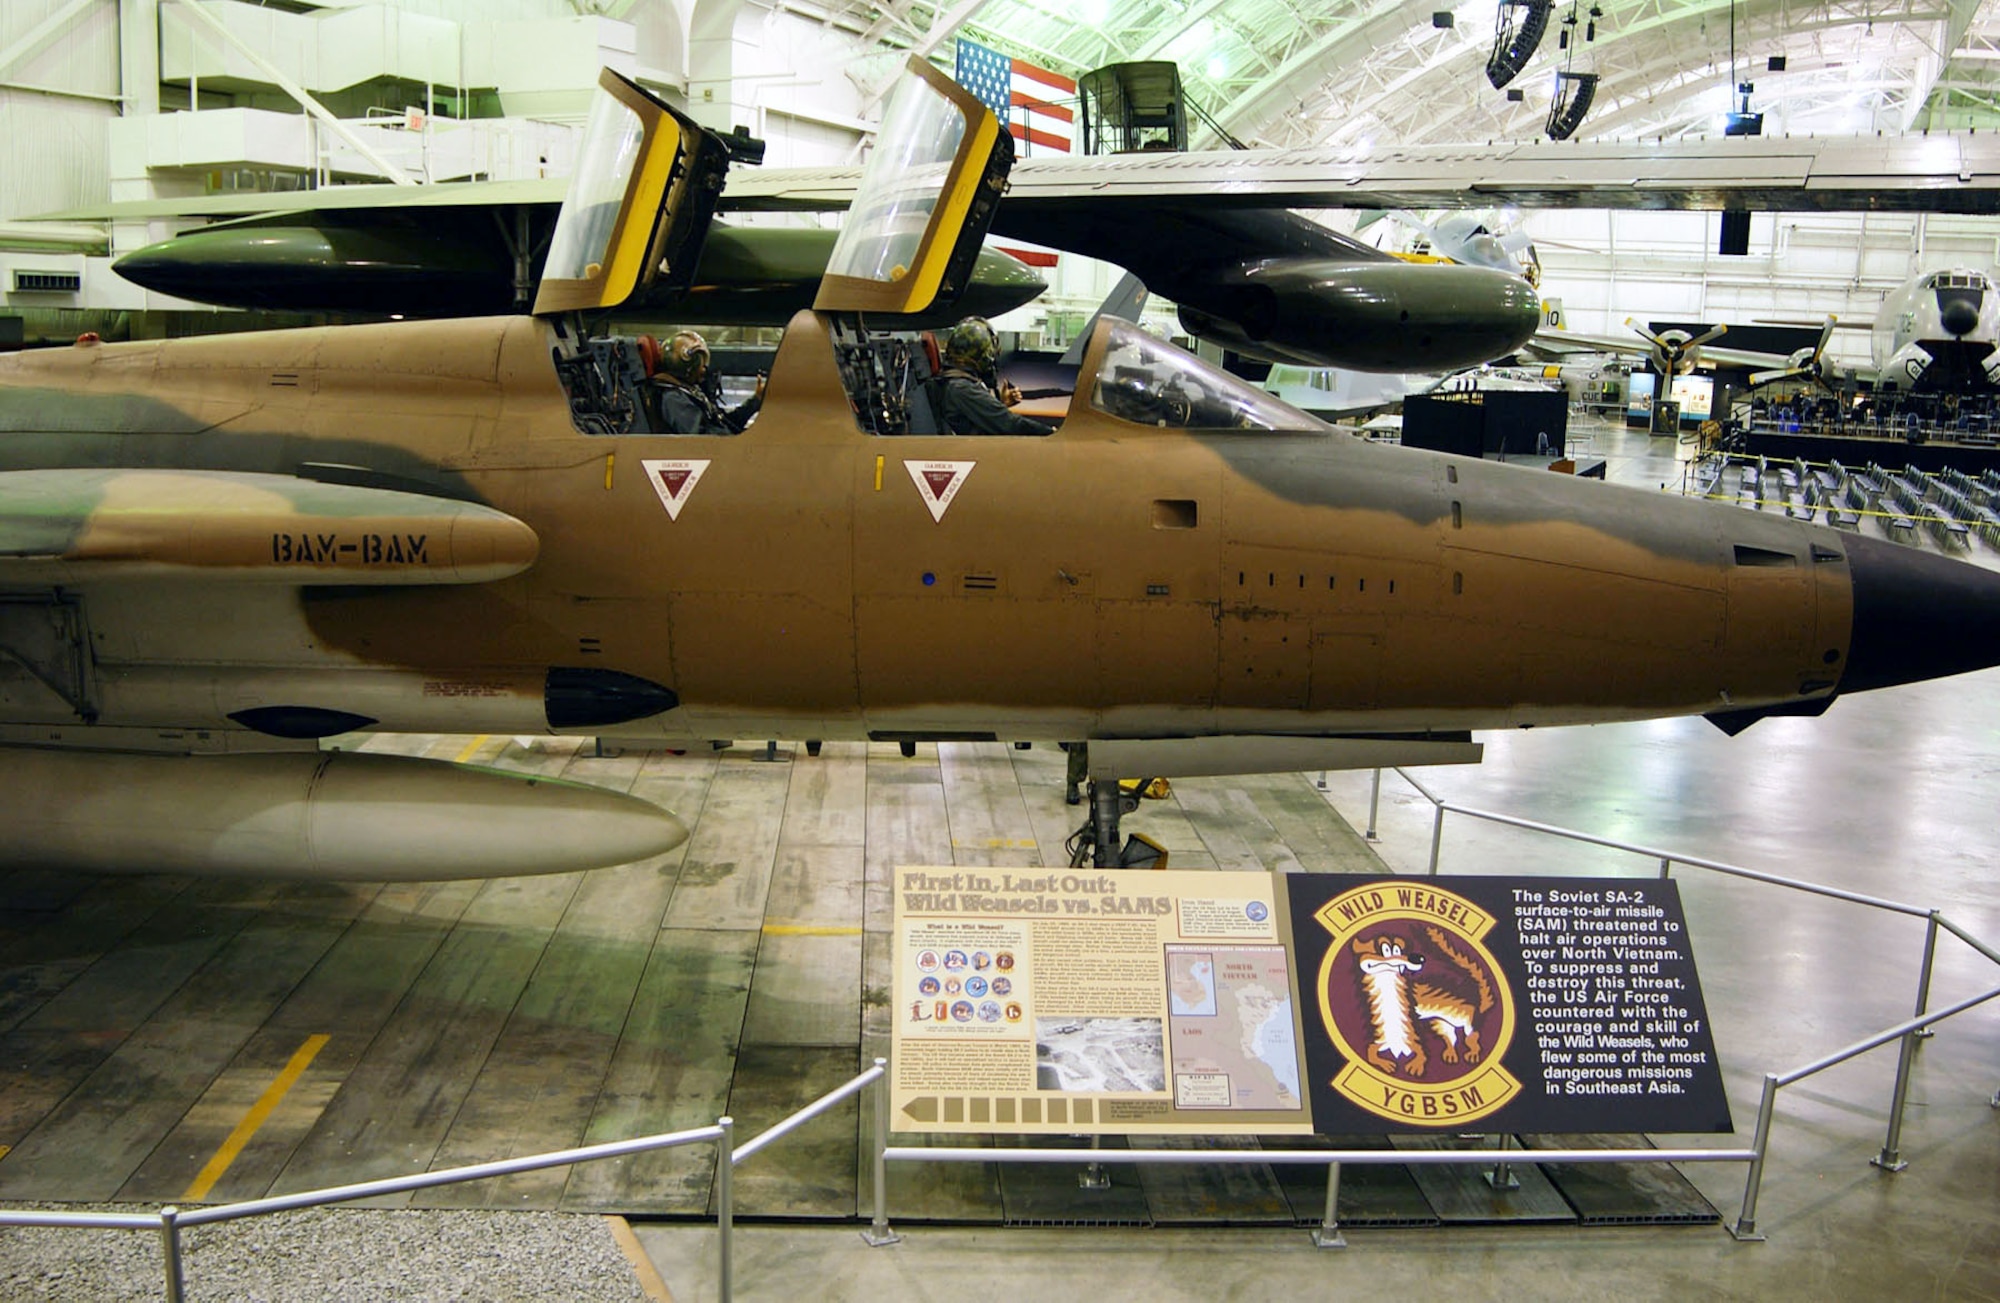 DAYTON, Ohio -- Wild Weasel exhibit, including the Republic F-105G, in the Southeast Asia War Gallery at the National Museum of the United States Air Force. (U.S. Air Force photo)